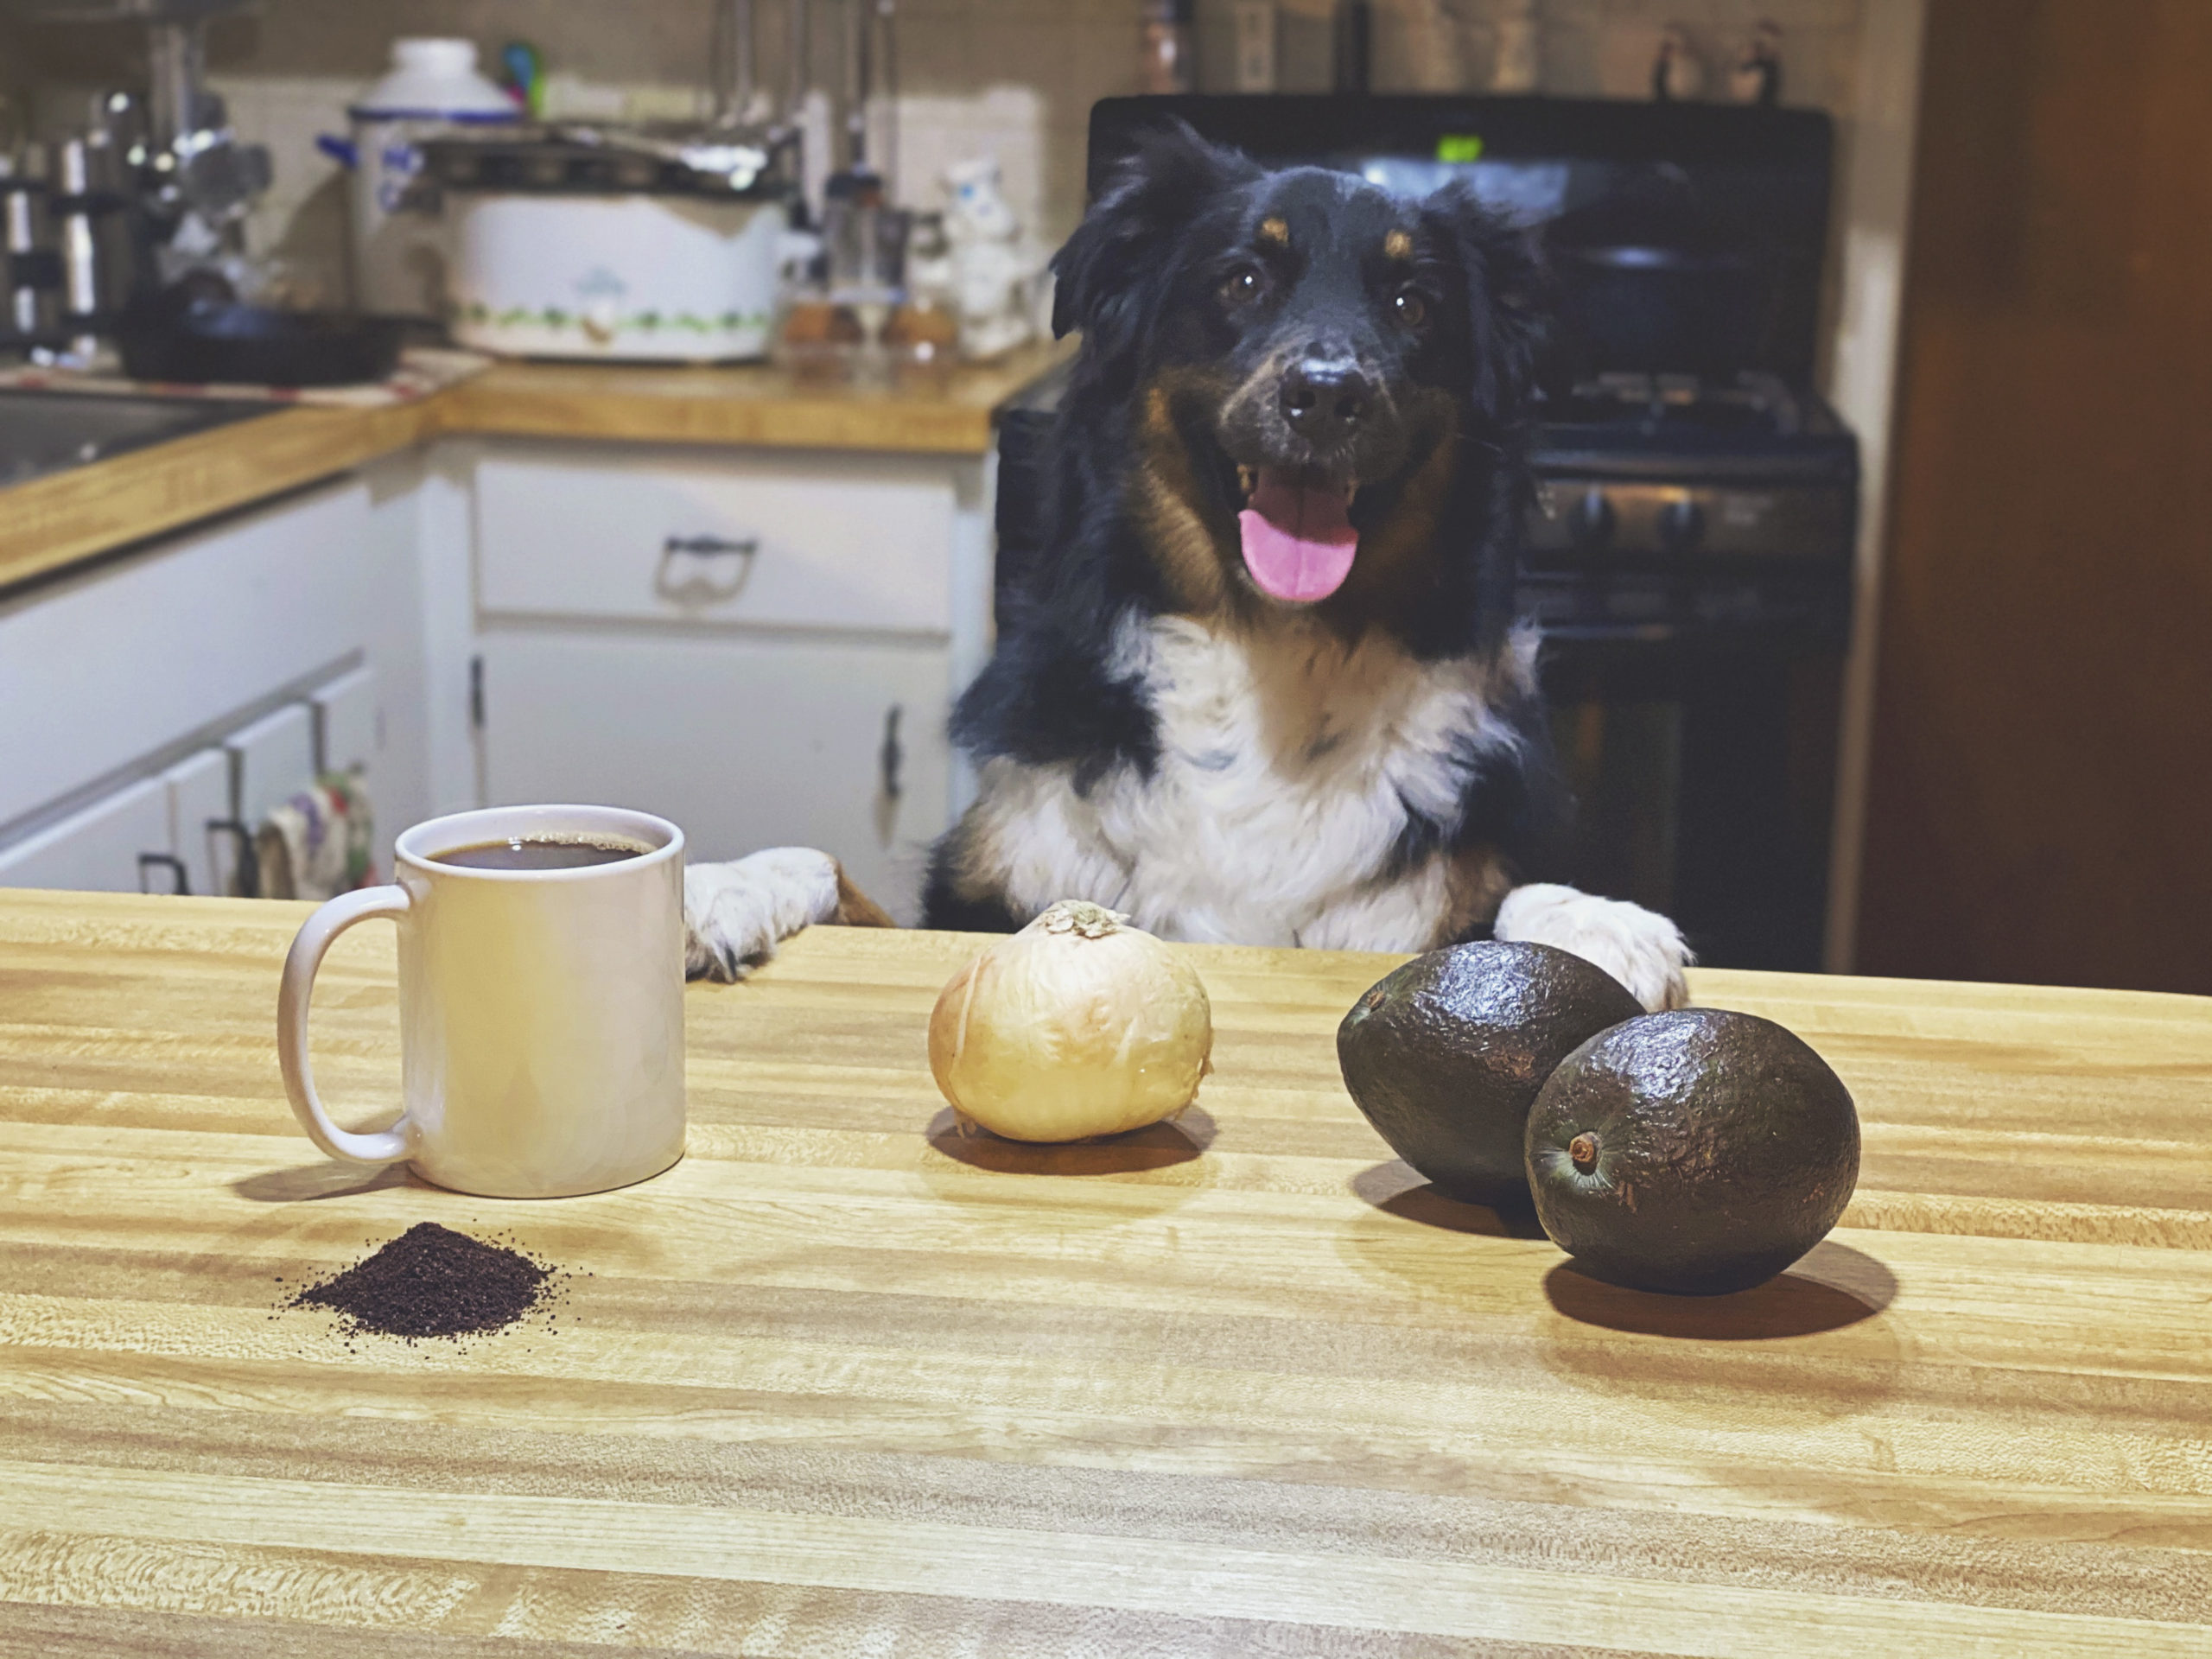 Australian Shepherd has paws on counter behind an array of bad treats for dogs jessica shaw photography